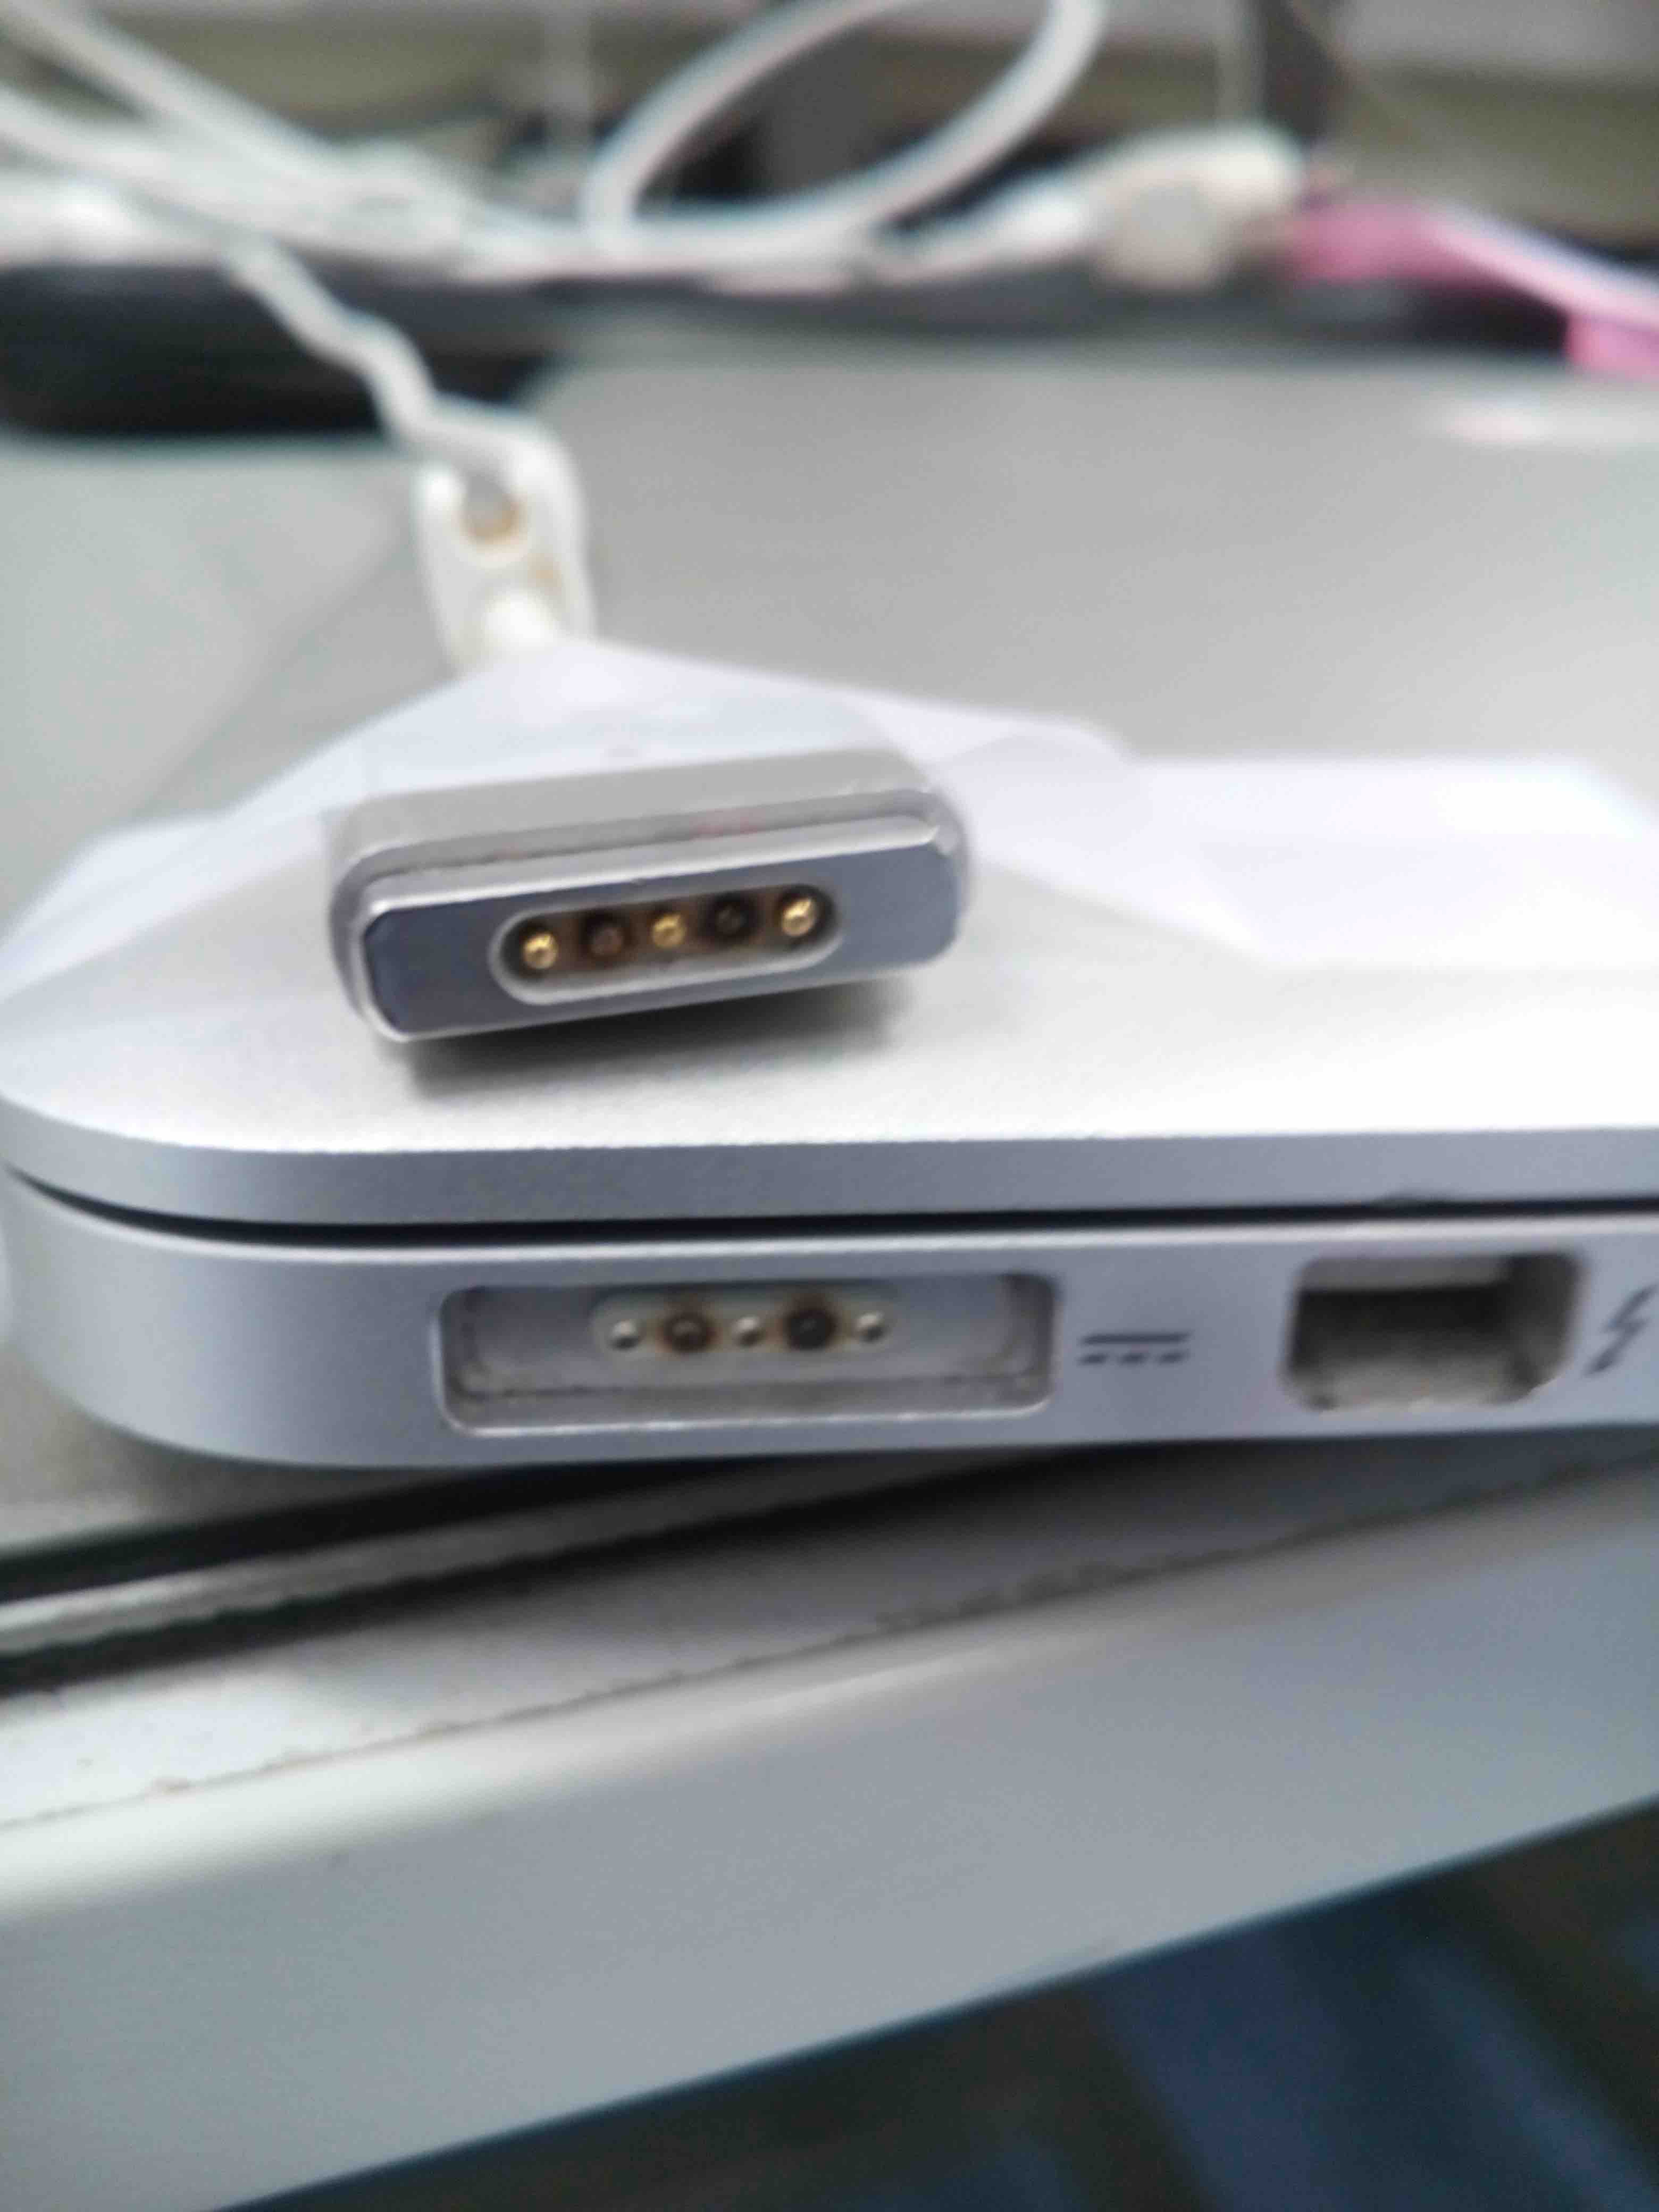 One of the pins in my magsafe 2 charger looks burnt. Is this okay? : r/mac